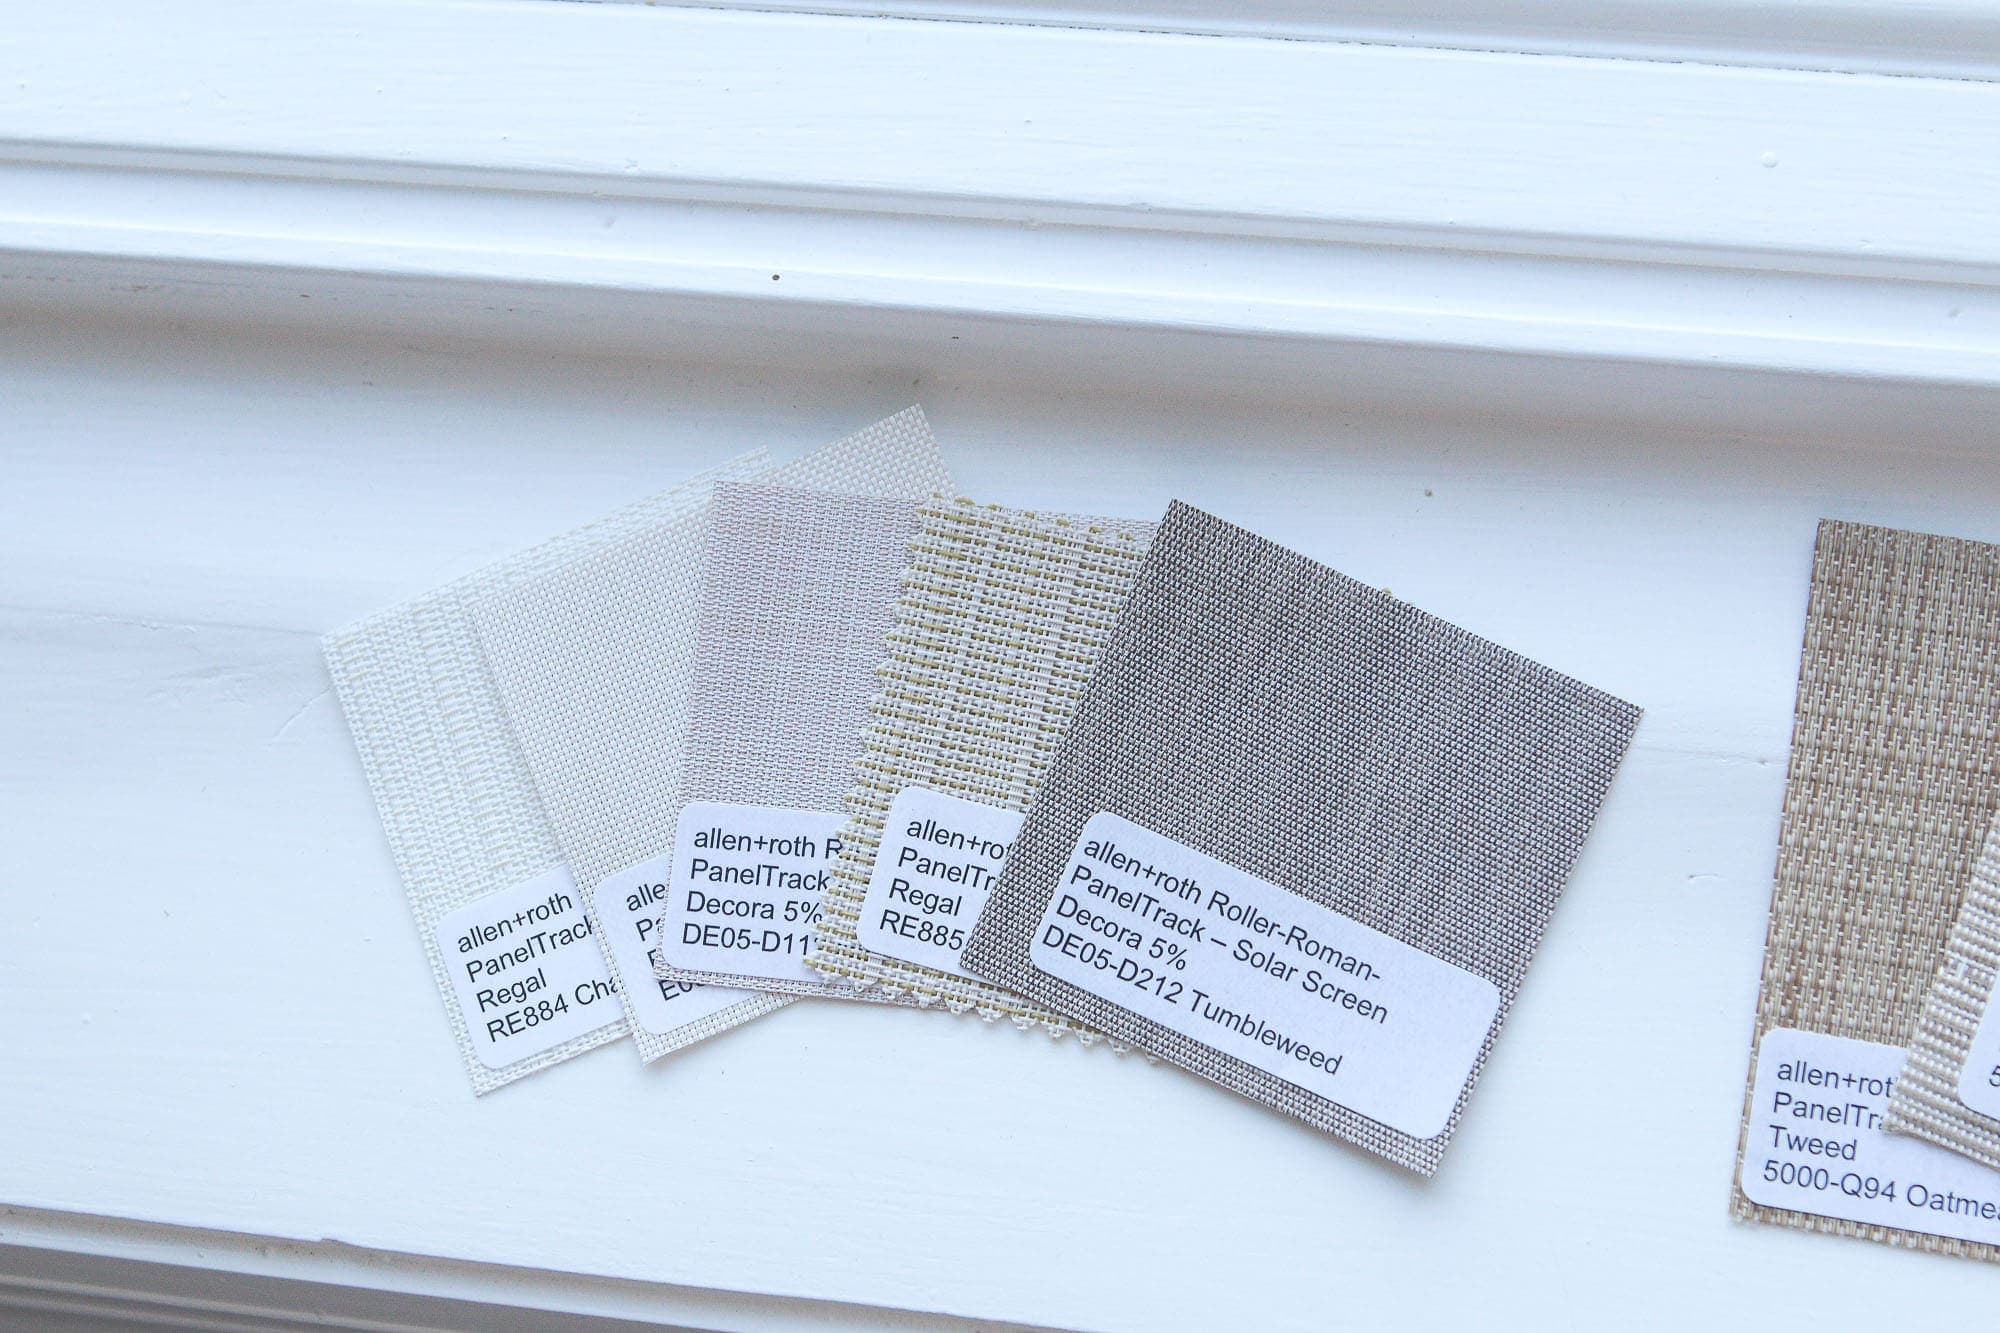 Choosing window treatments from fabric swatches